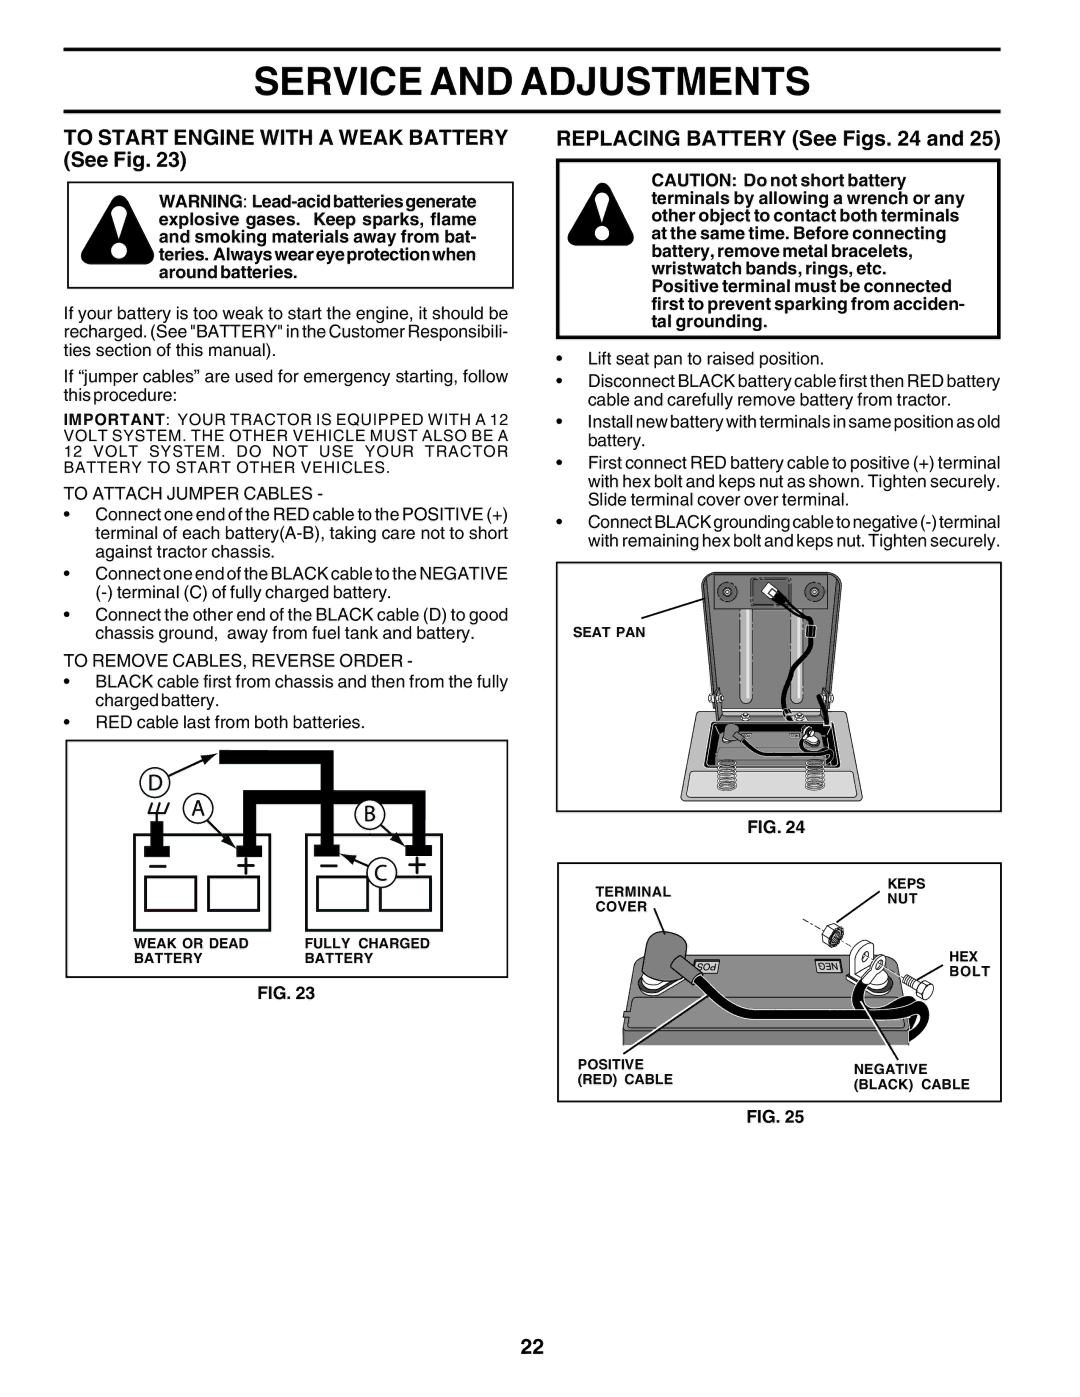 Weed Eater 183670 manual To Start Engine with a Weak Battery See Fig, Replacing Battery See Figs, To Attach Jumper Cables 